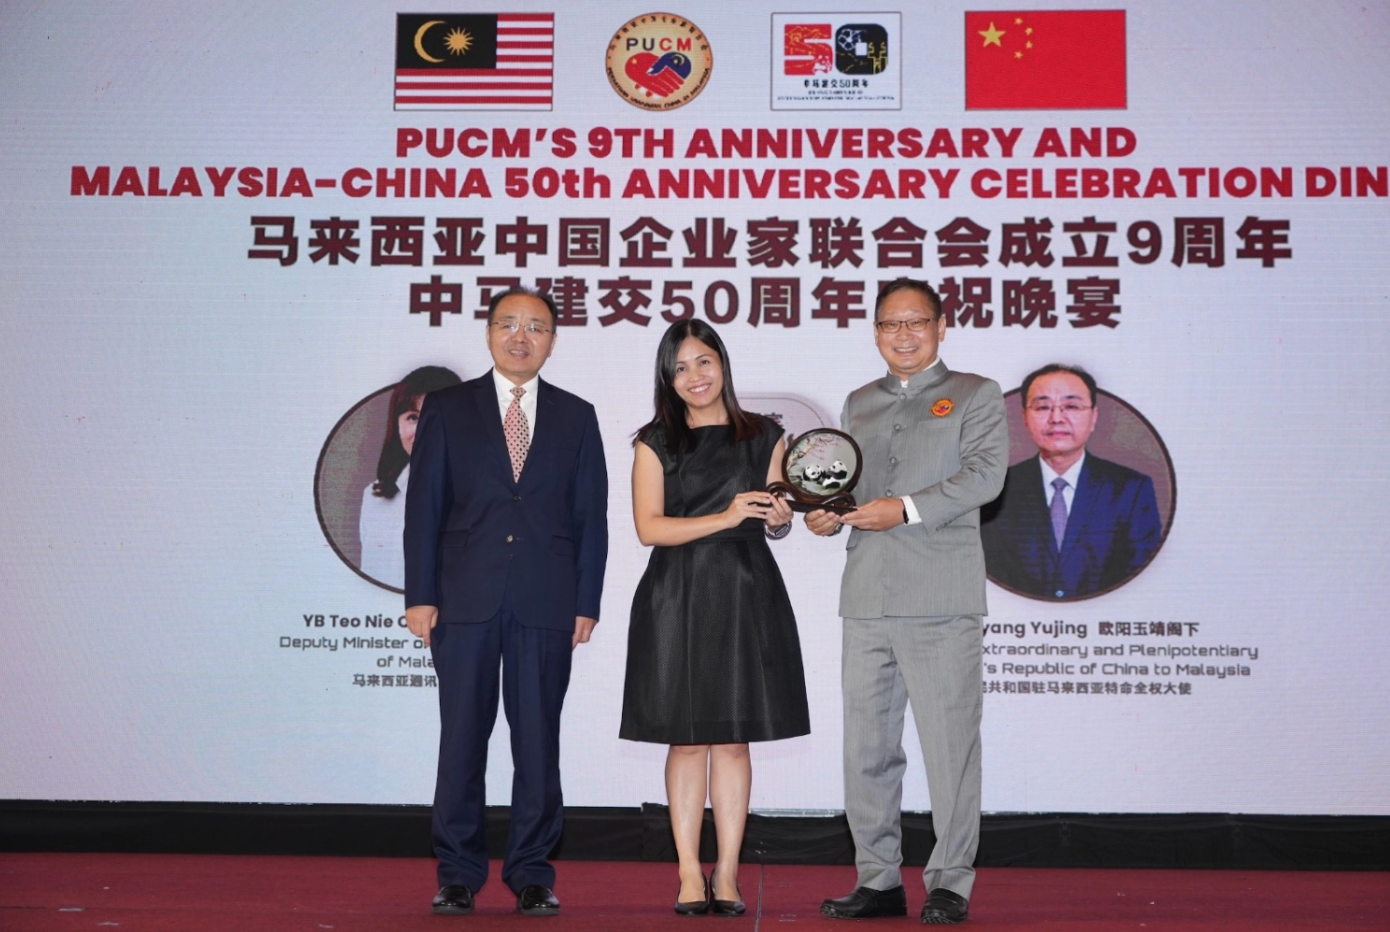 MALAYSIA-CHINA DIPLOMATIC RELATIONS HAVE ACHIEVED SIGNIFICANT MILESTONES - TEO